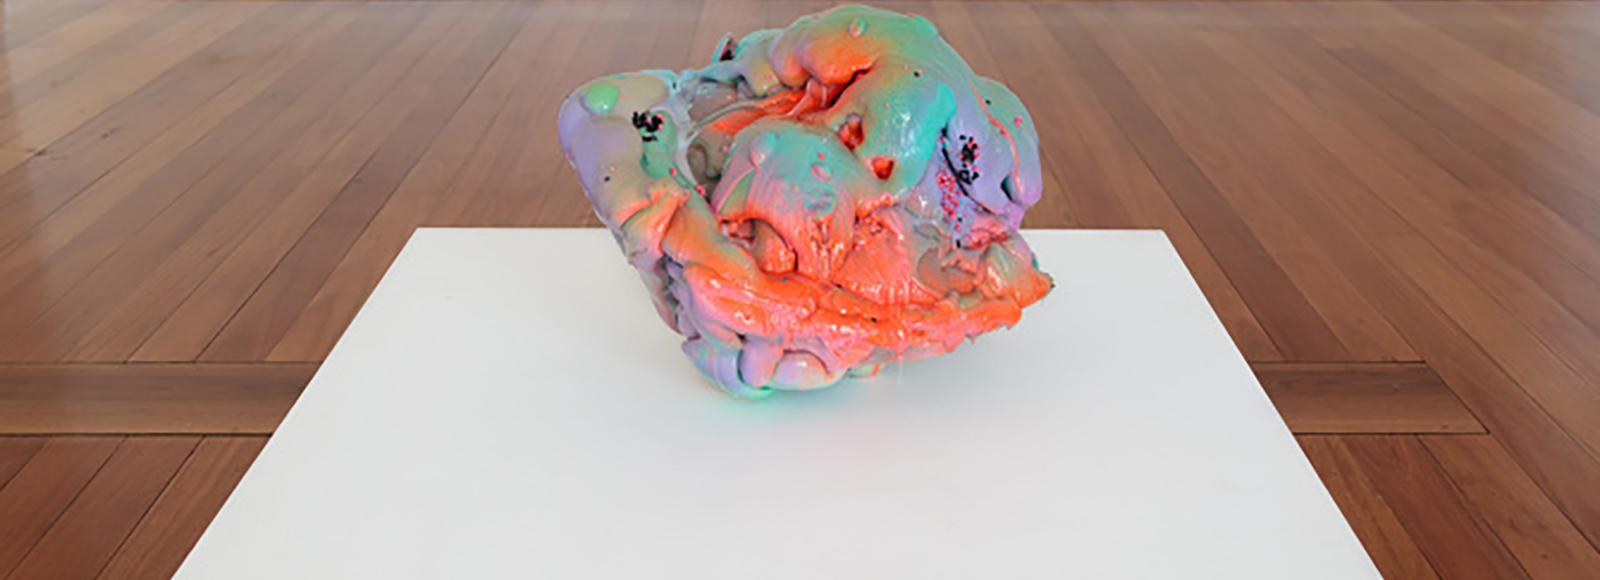 Louise Zhang, I went to mars and the isolation and red speckled solar winds eroded my sanity and it was beautiful, 2015 foam, clay, acrylic, polyurethane, glass stamens, foam stamens, plastics 45 x 55 x 45cm. PAINT15 | Artereal Galllery 